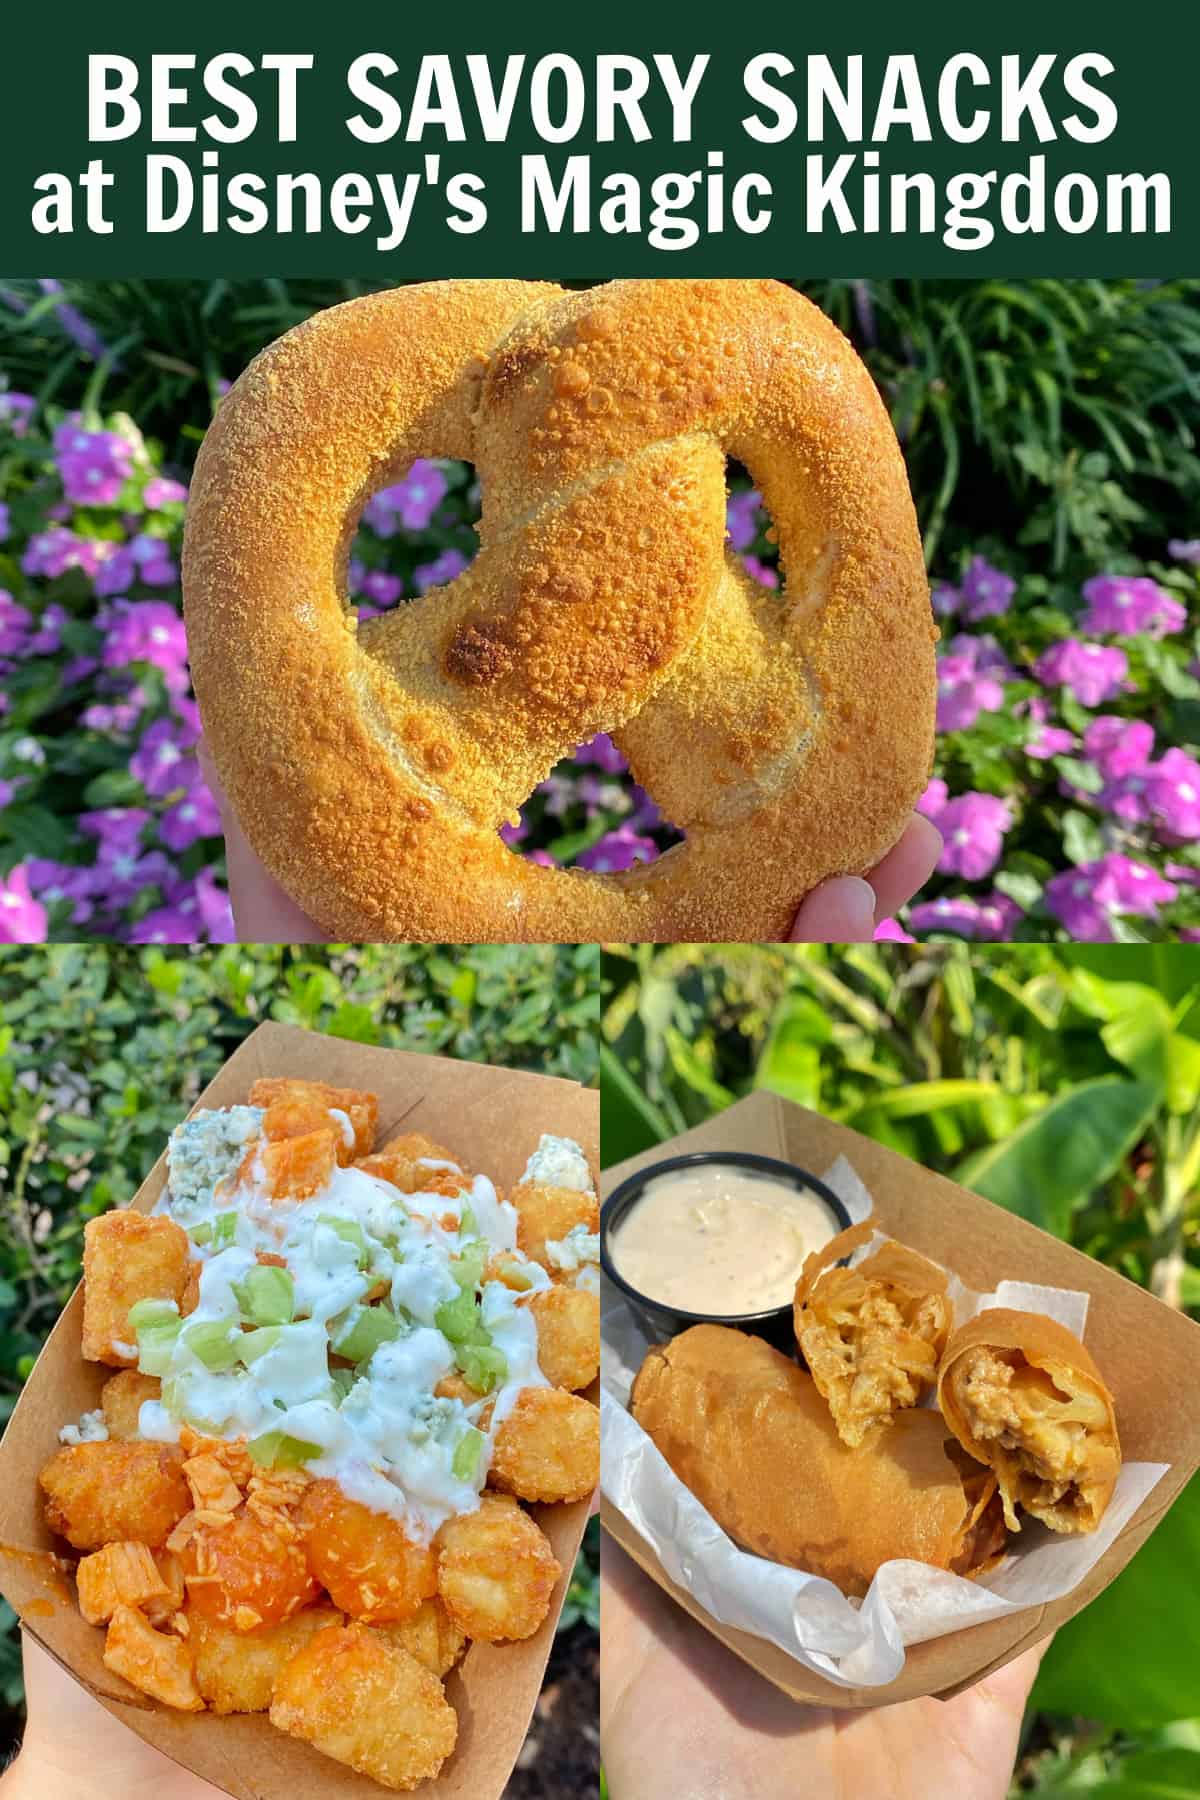 photo collage of stuffed pretzel, tater tots and spring rolls